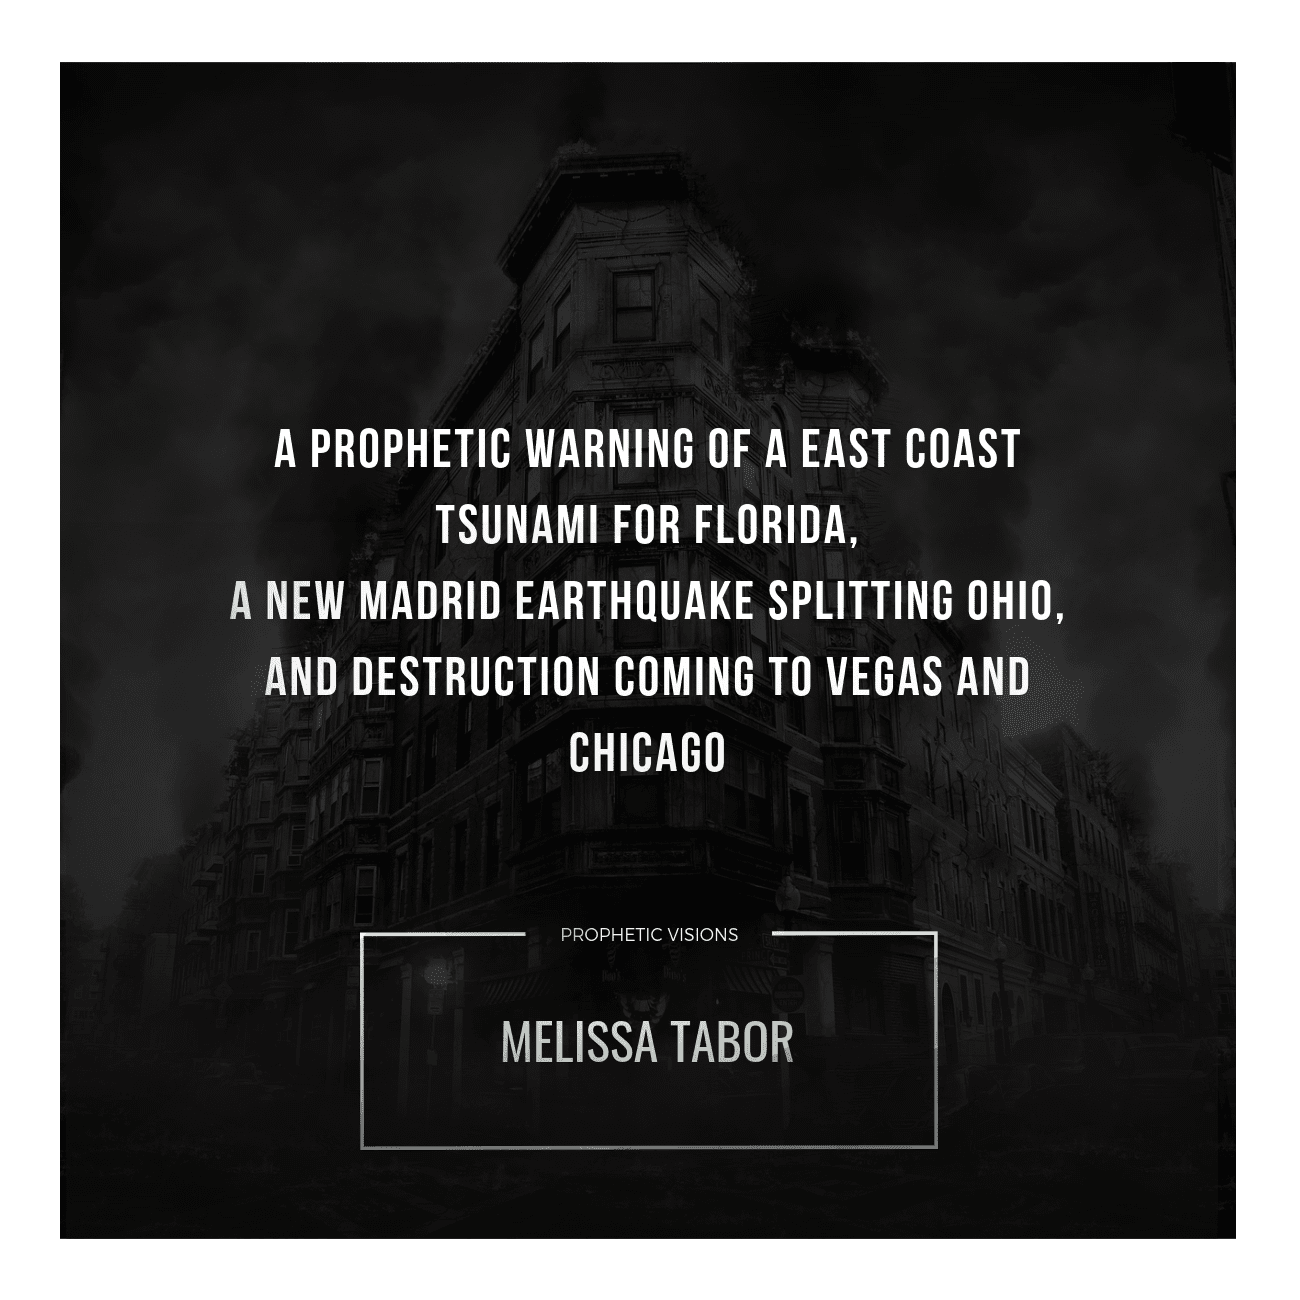 A Prophetic Warning of a East Coast Tsunami for Florida, a New Madrid Earthquake Splitting Ohio, and Destruction Coming to Vegas and Chicago - Melissa Tabor